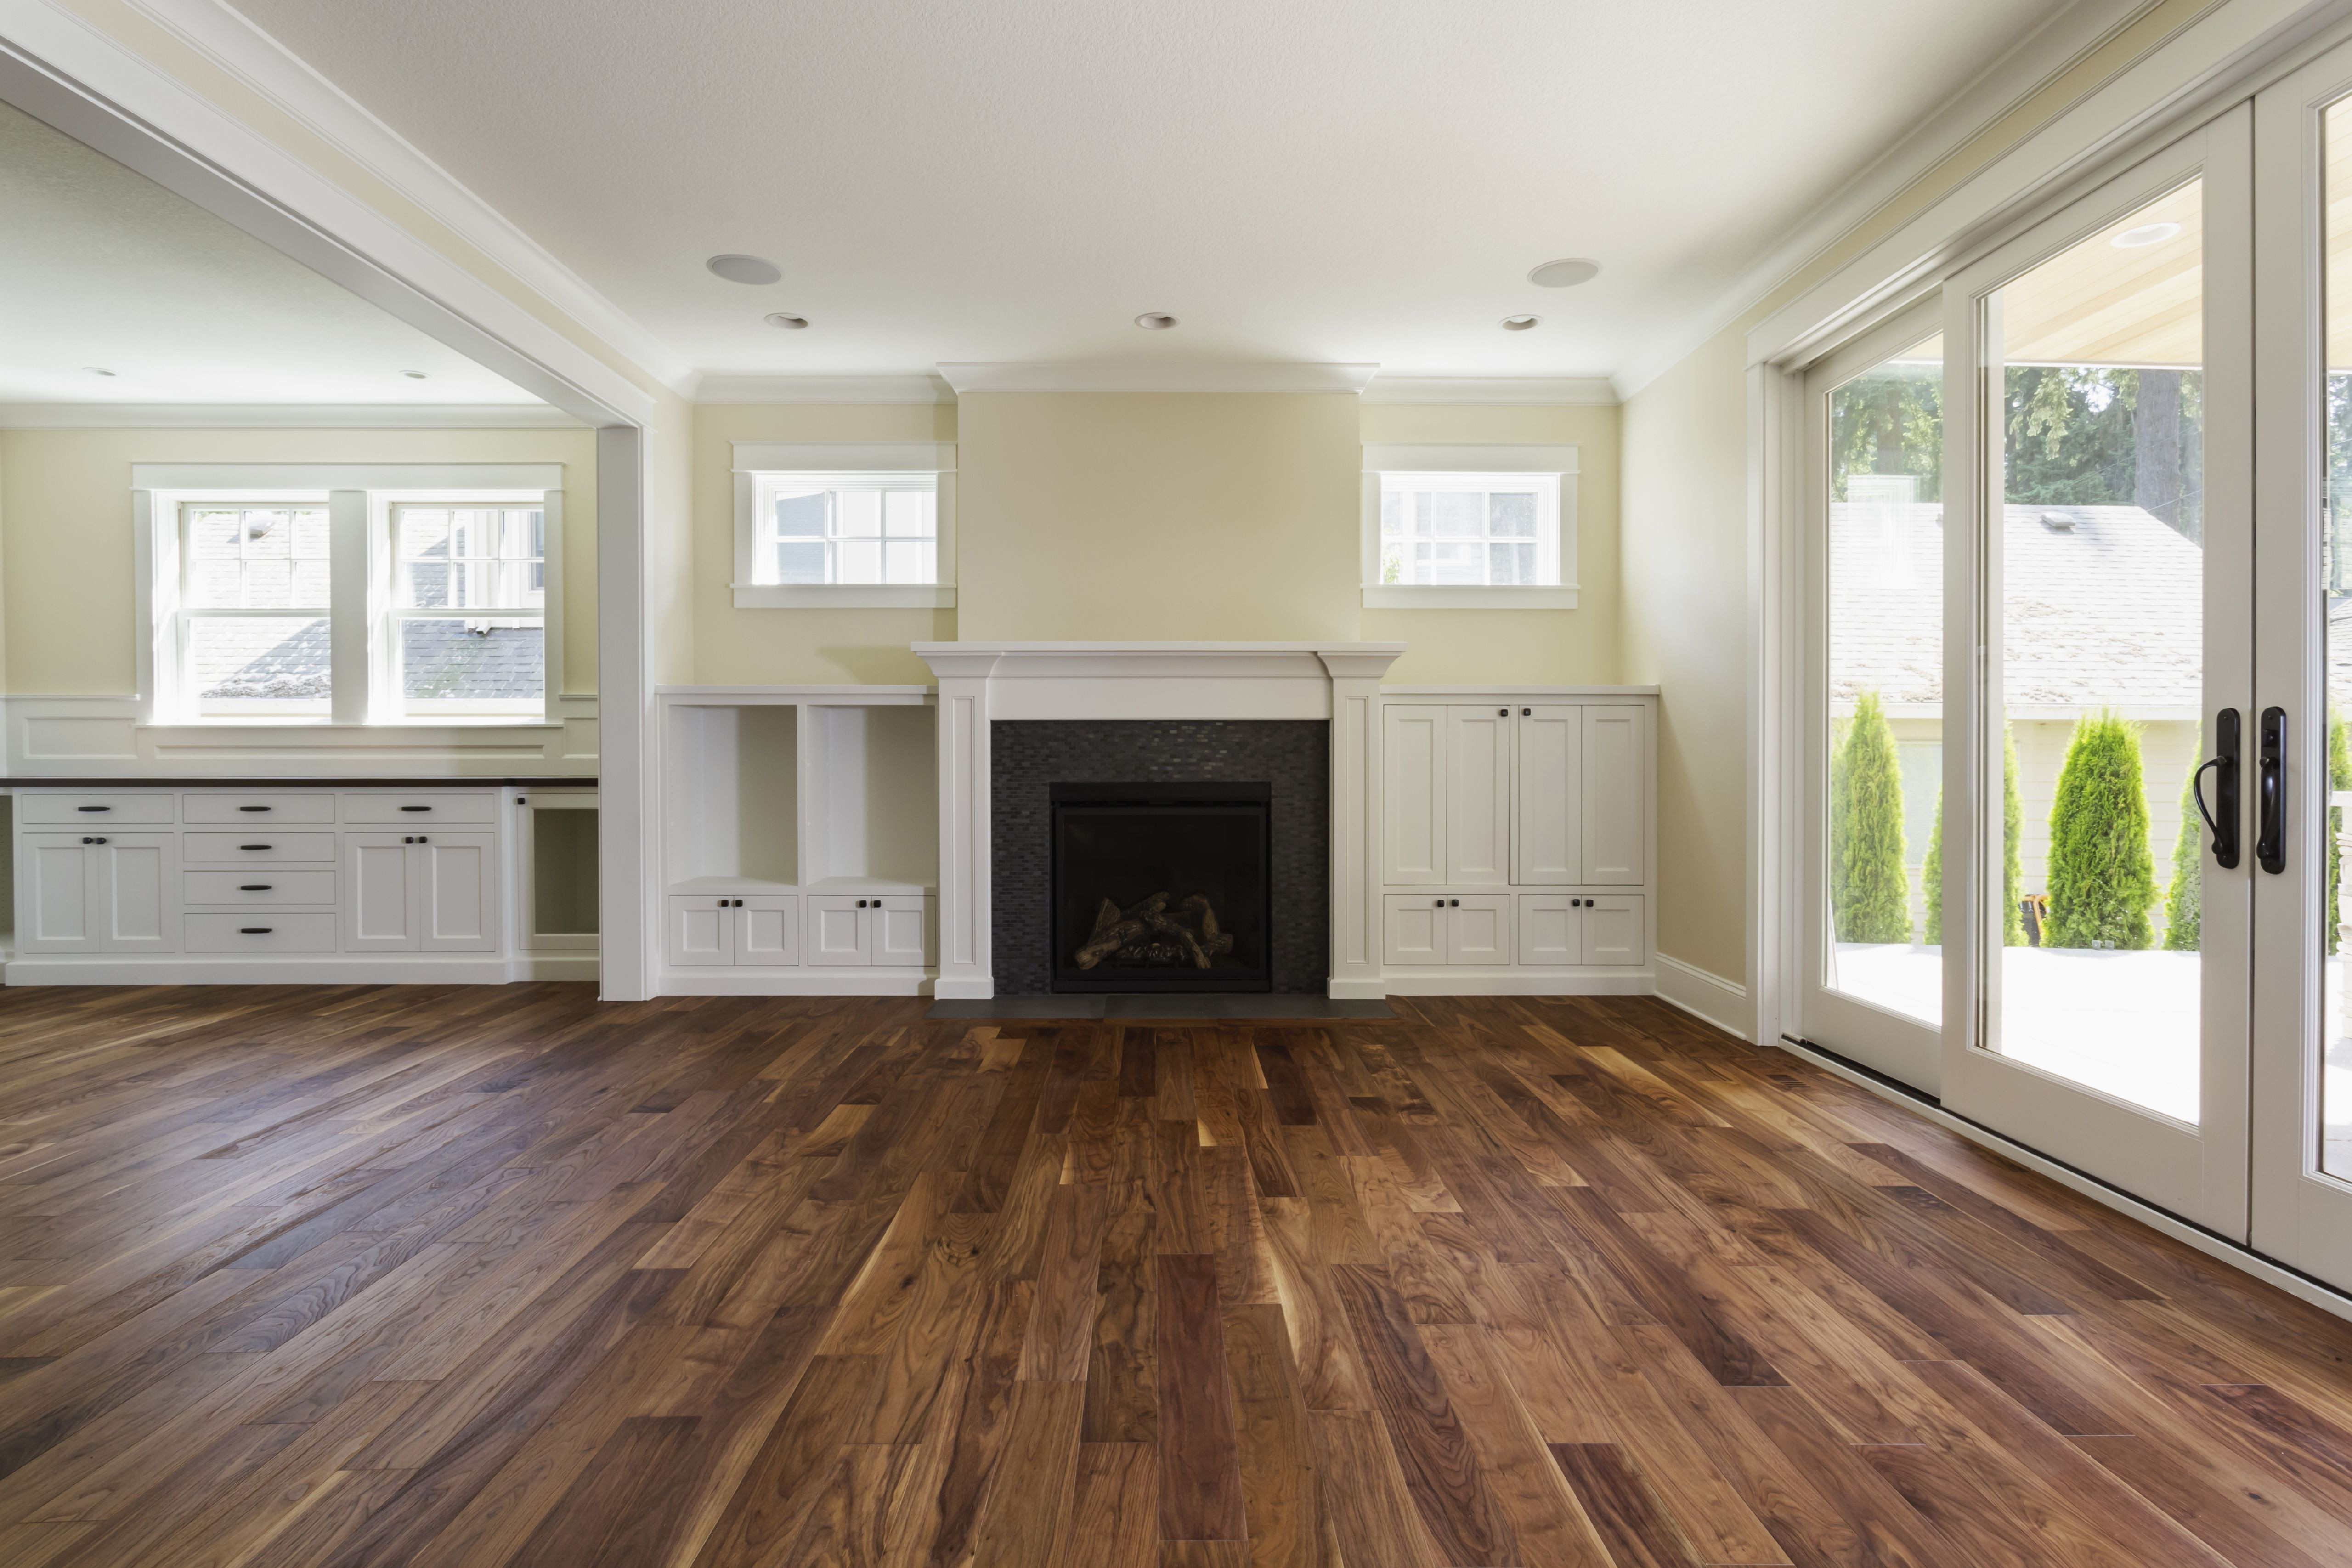 B F Hardwood Flooring Of the Pros and Cons Of Prefinished Hardwood Flooring for Fireplace and Built In Shelves In Living Room 482143011 57bef8e33df78cc16e035397